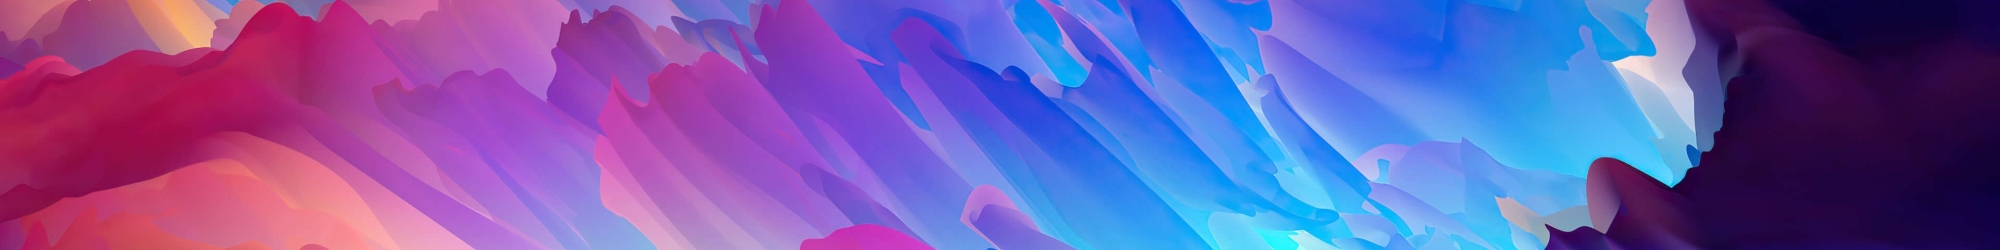 X Resolution Abstract Rey Of Colors K X Resolution Wallpaper Wallpapers Den